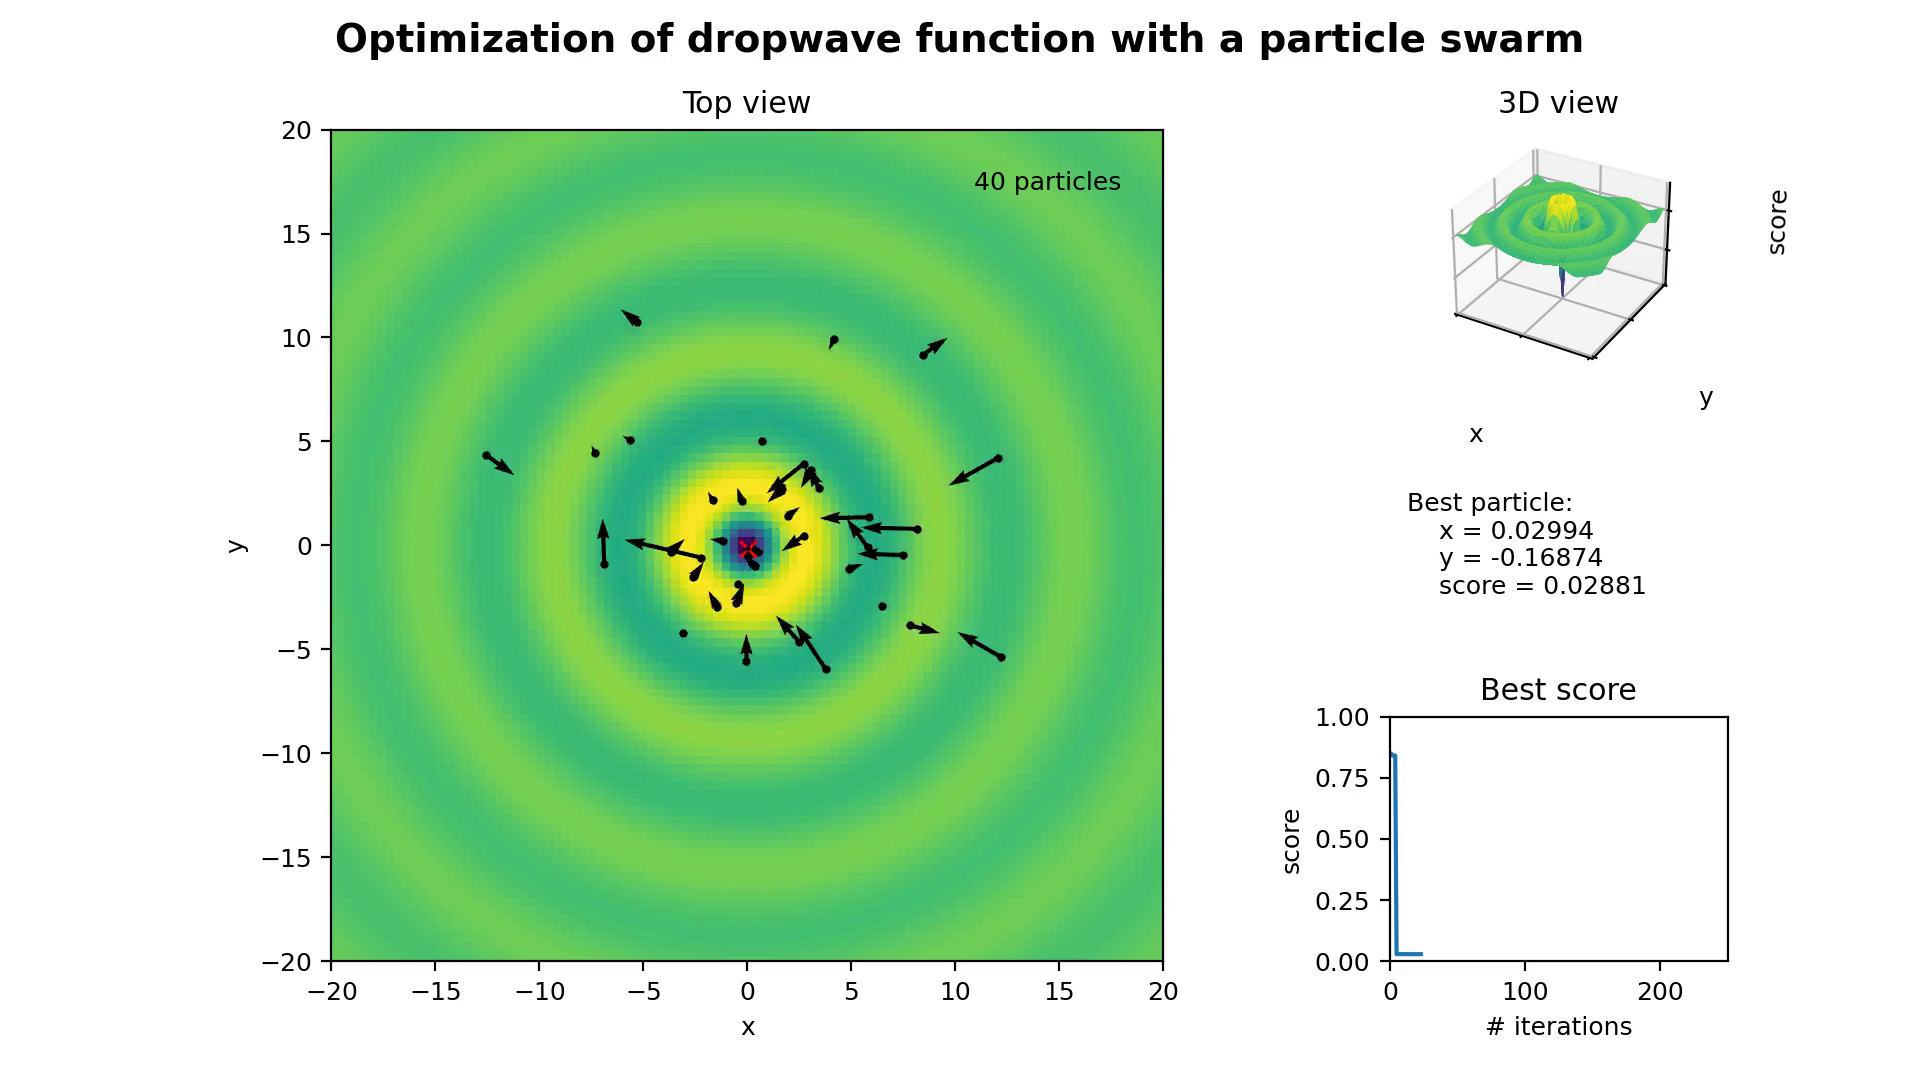 Optimization of dropwave function with a particle swarm